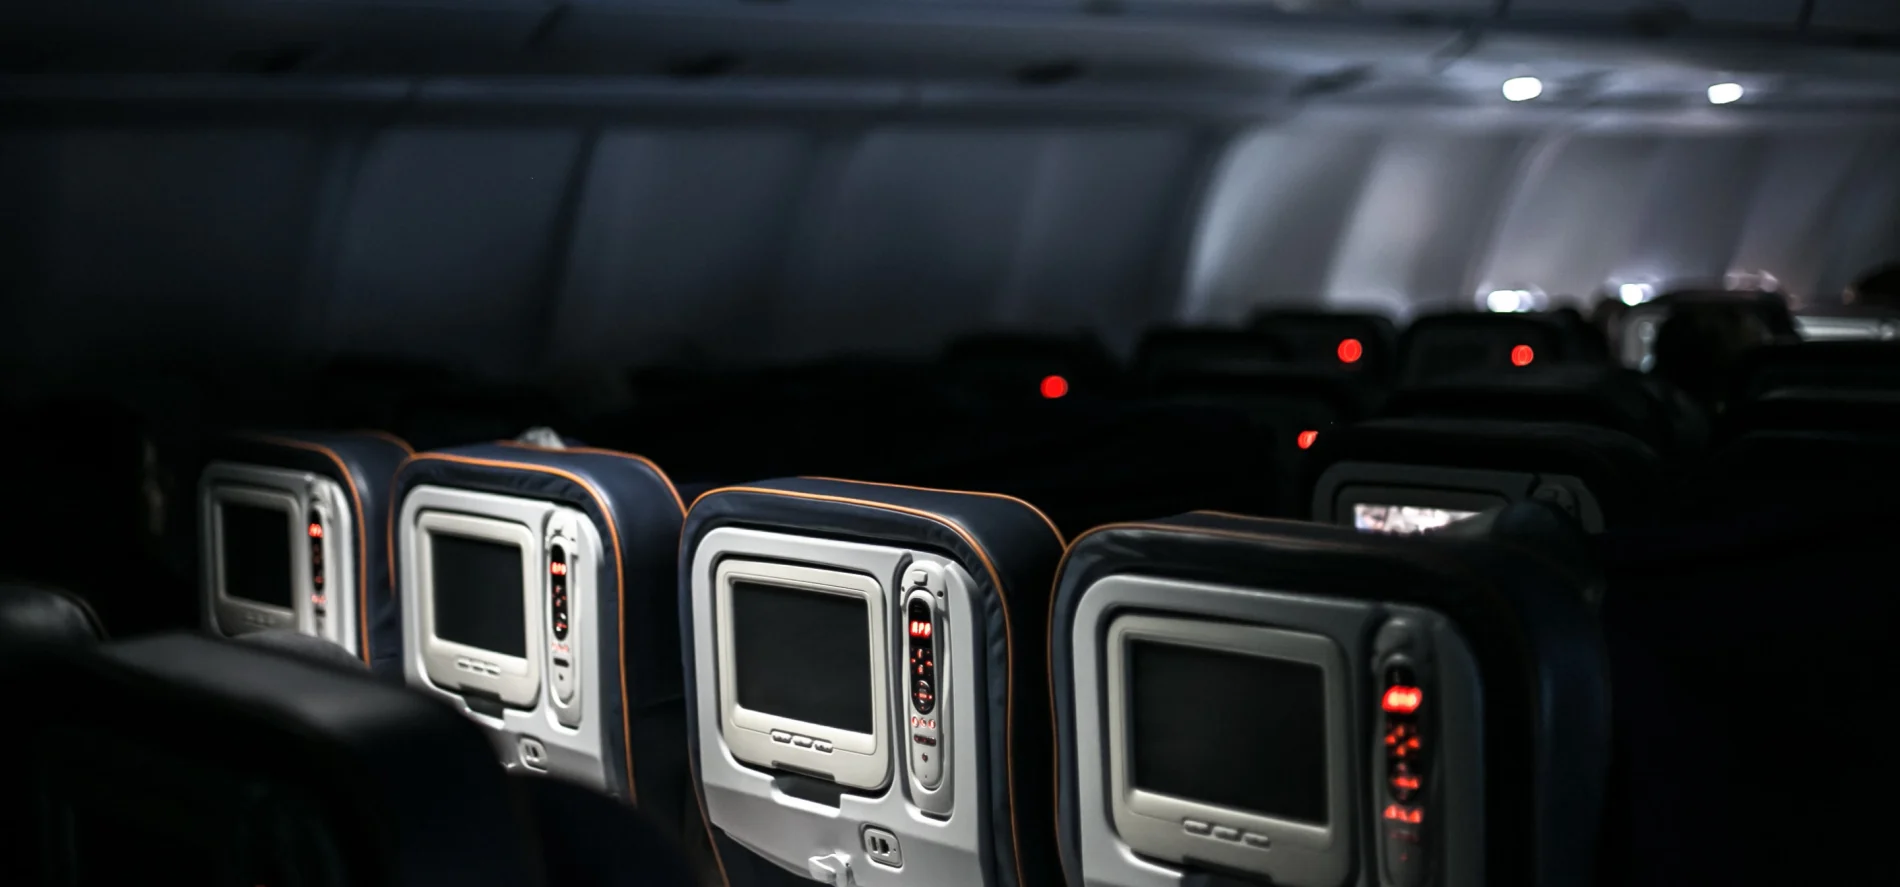 Image of the inside of an airplane entertainment screens and controllers